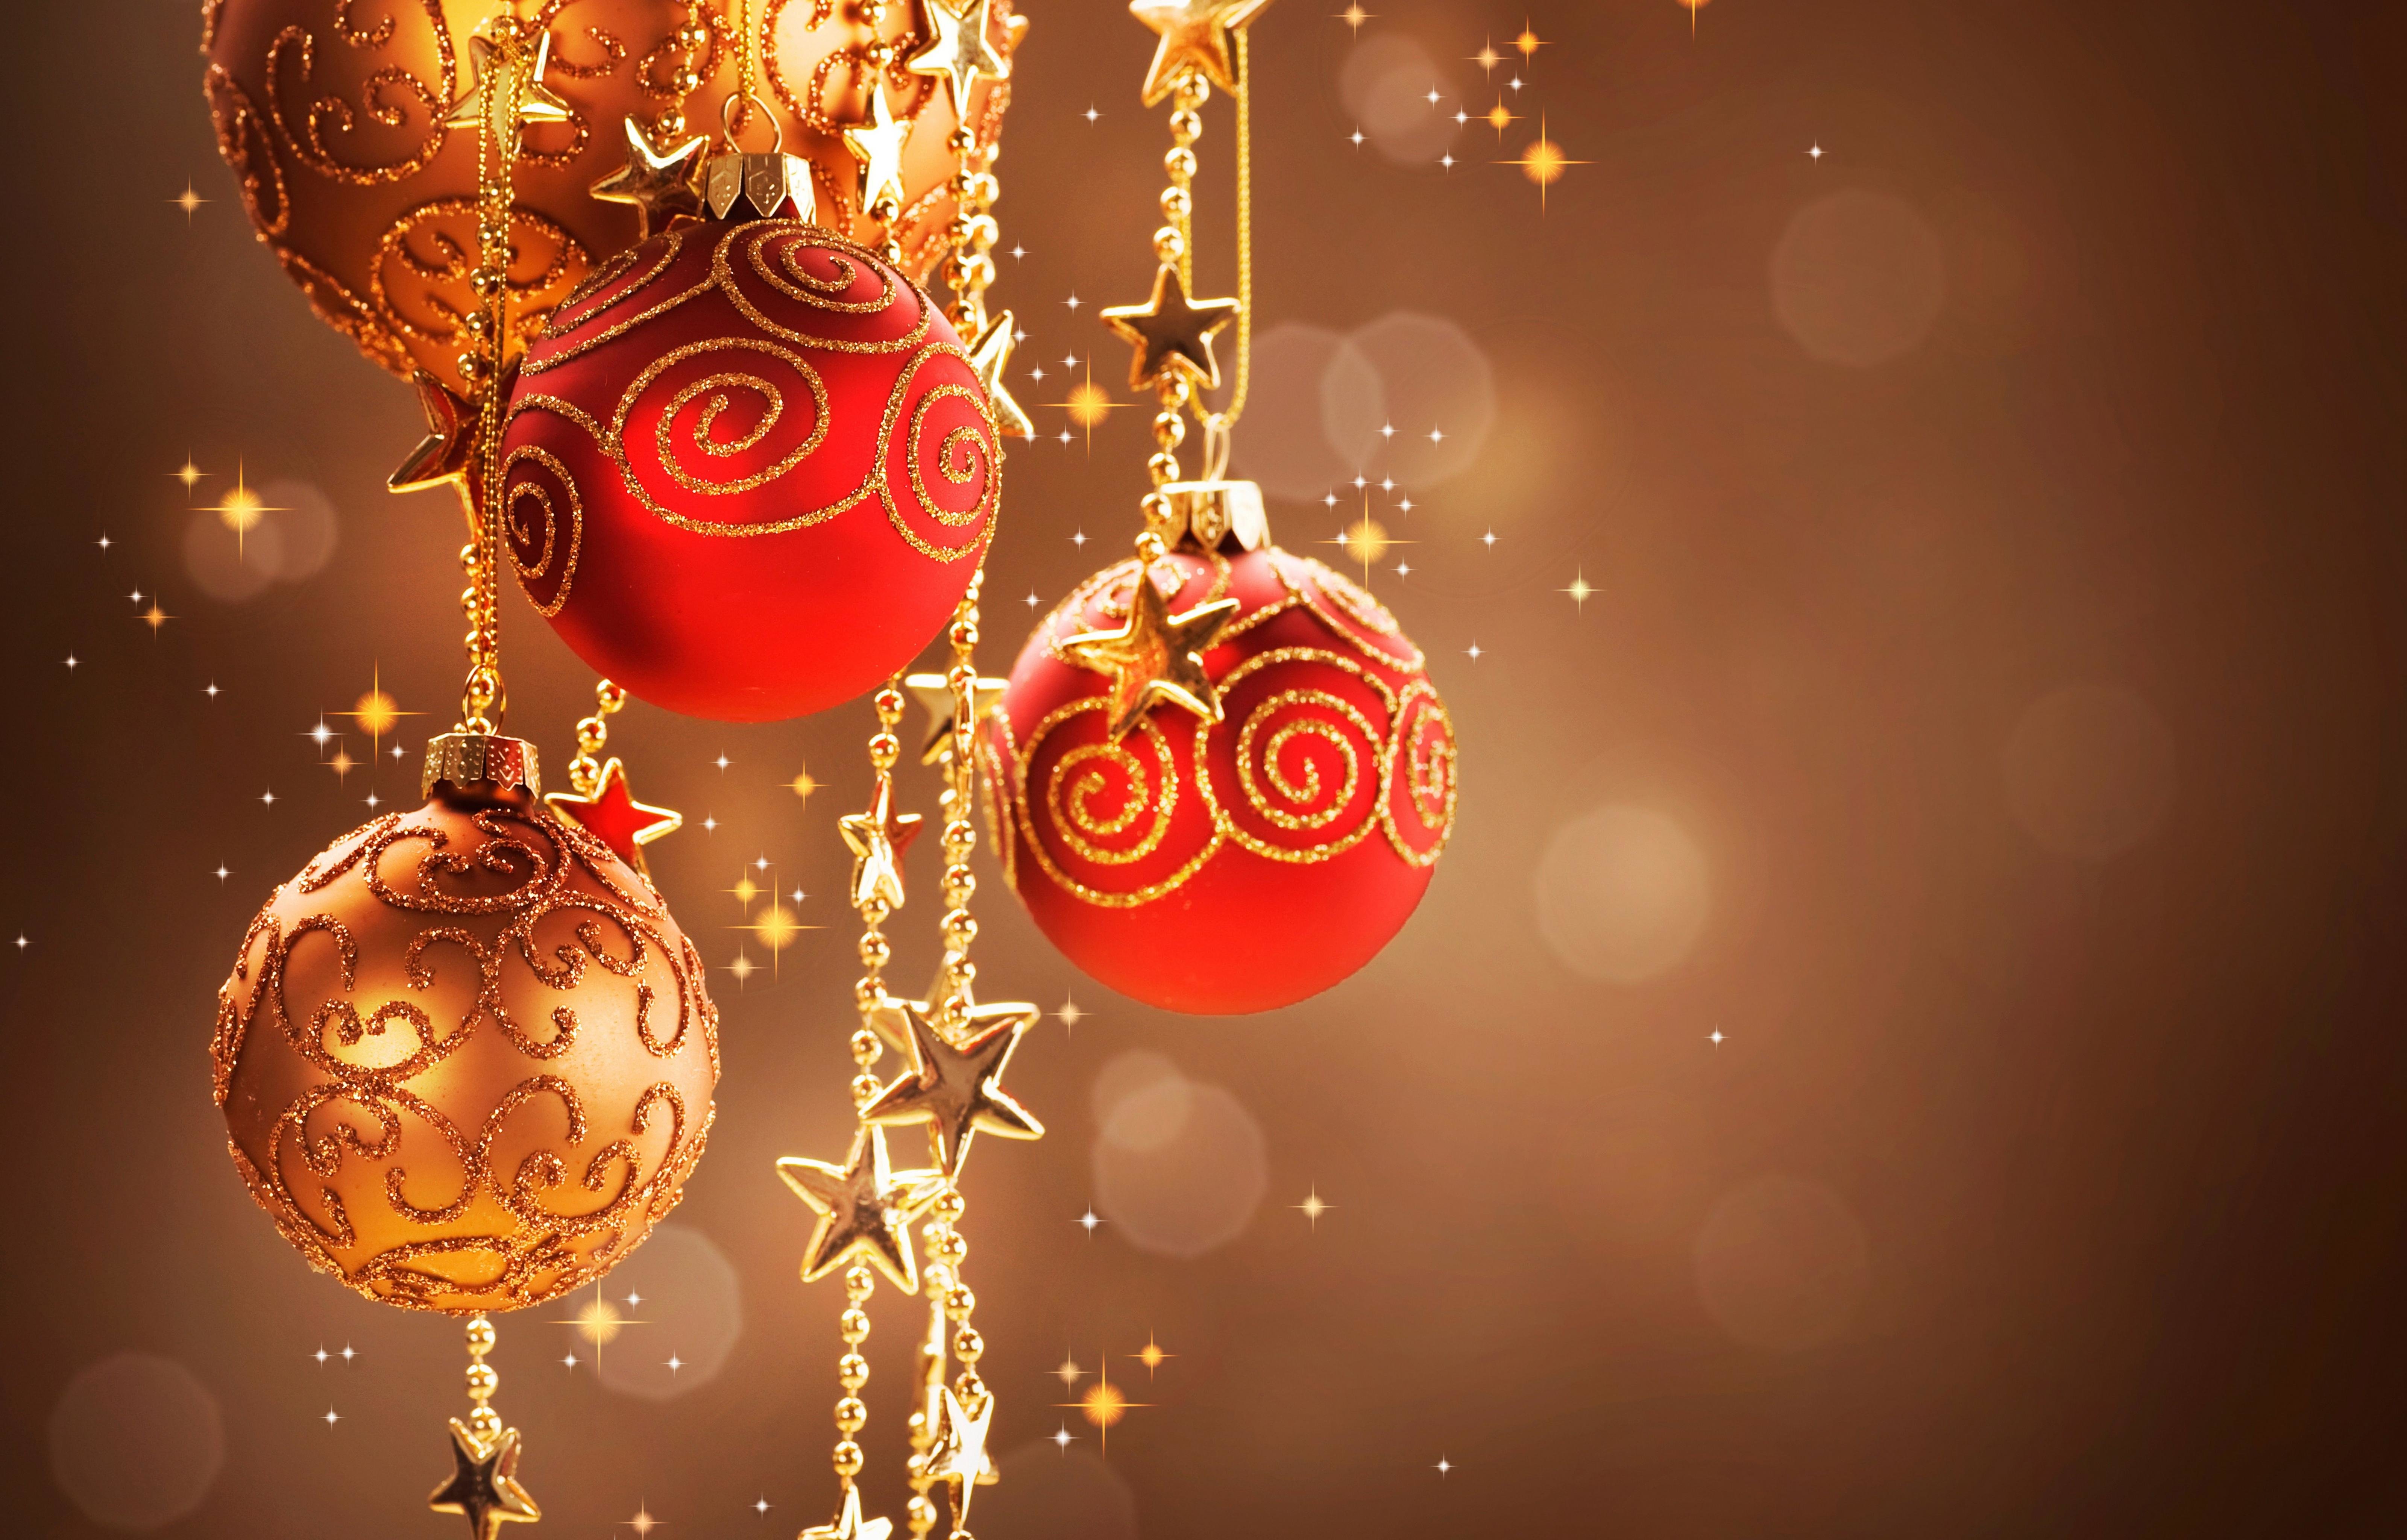 Download hd 6400x4096 Christmas Ornaments/Decorations computer background ID:435817 for free